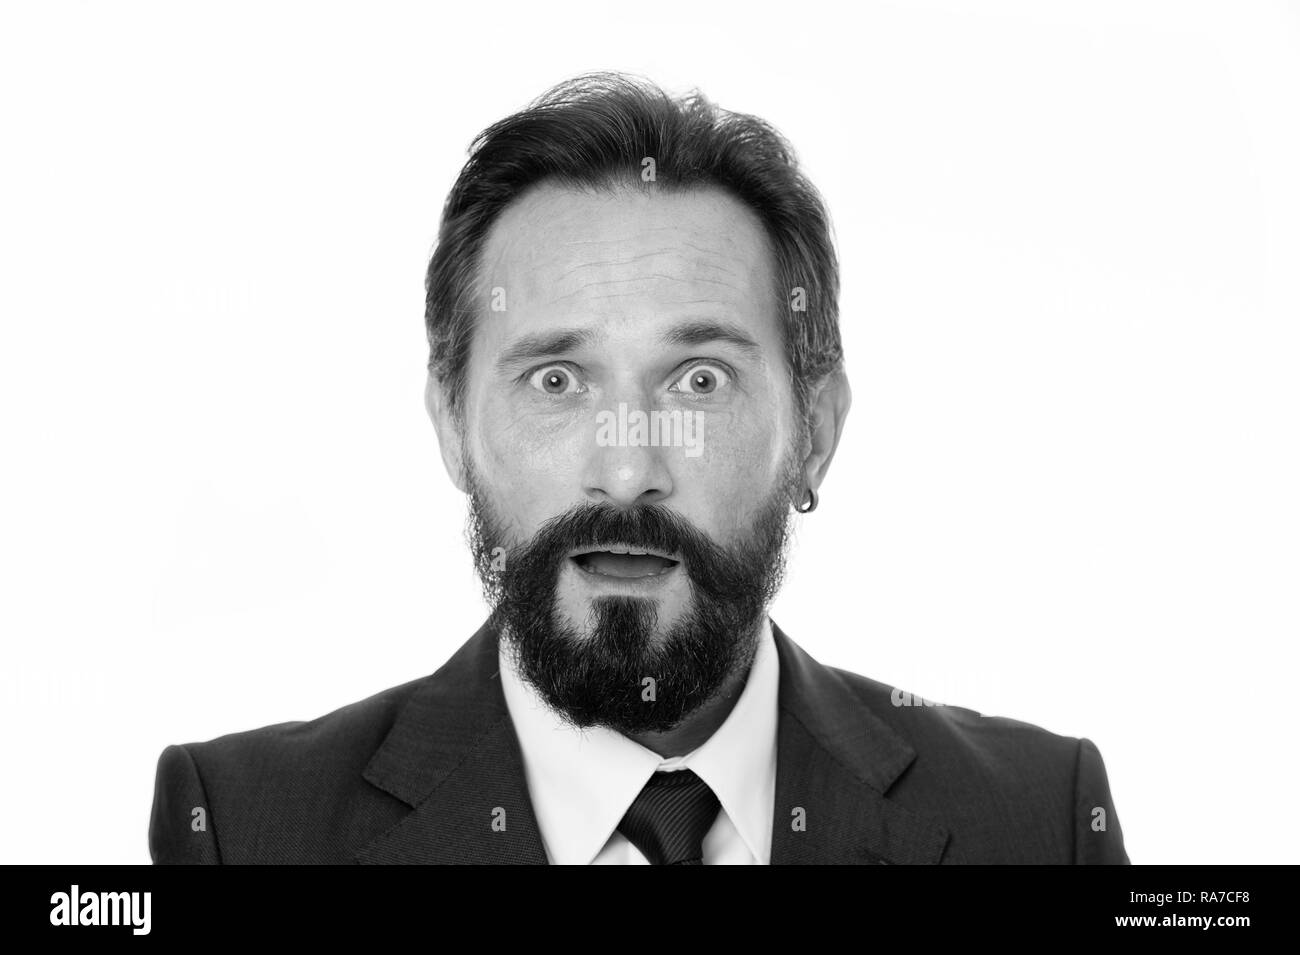 Experienced but confused. Male face puzzled confused with beard and mustache close up. Business people dress code. Business style appearance. Businessman classic formal clothing modern detail earring. Stock Photo